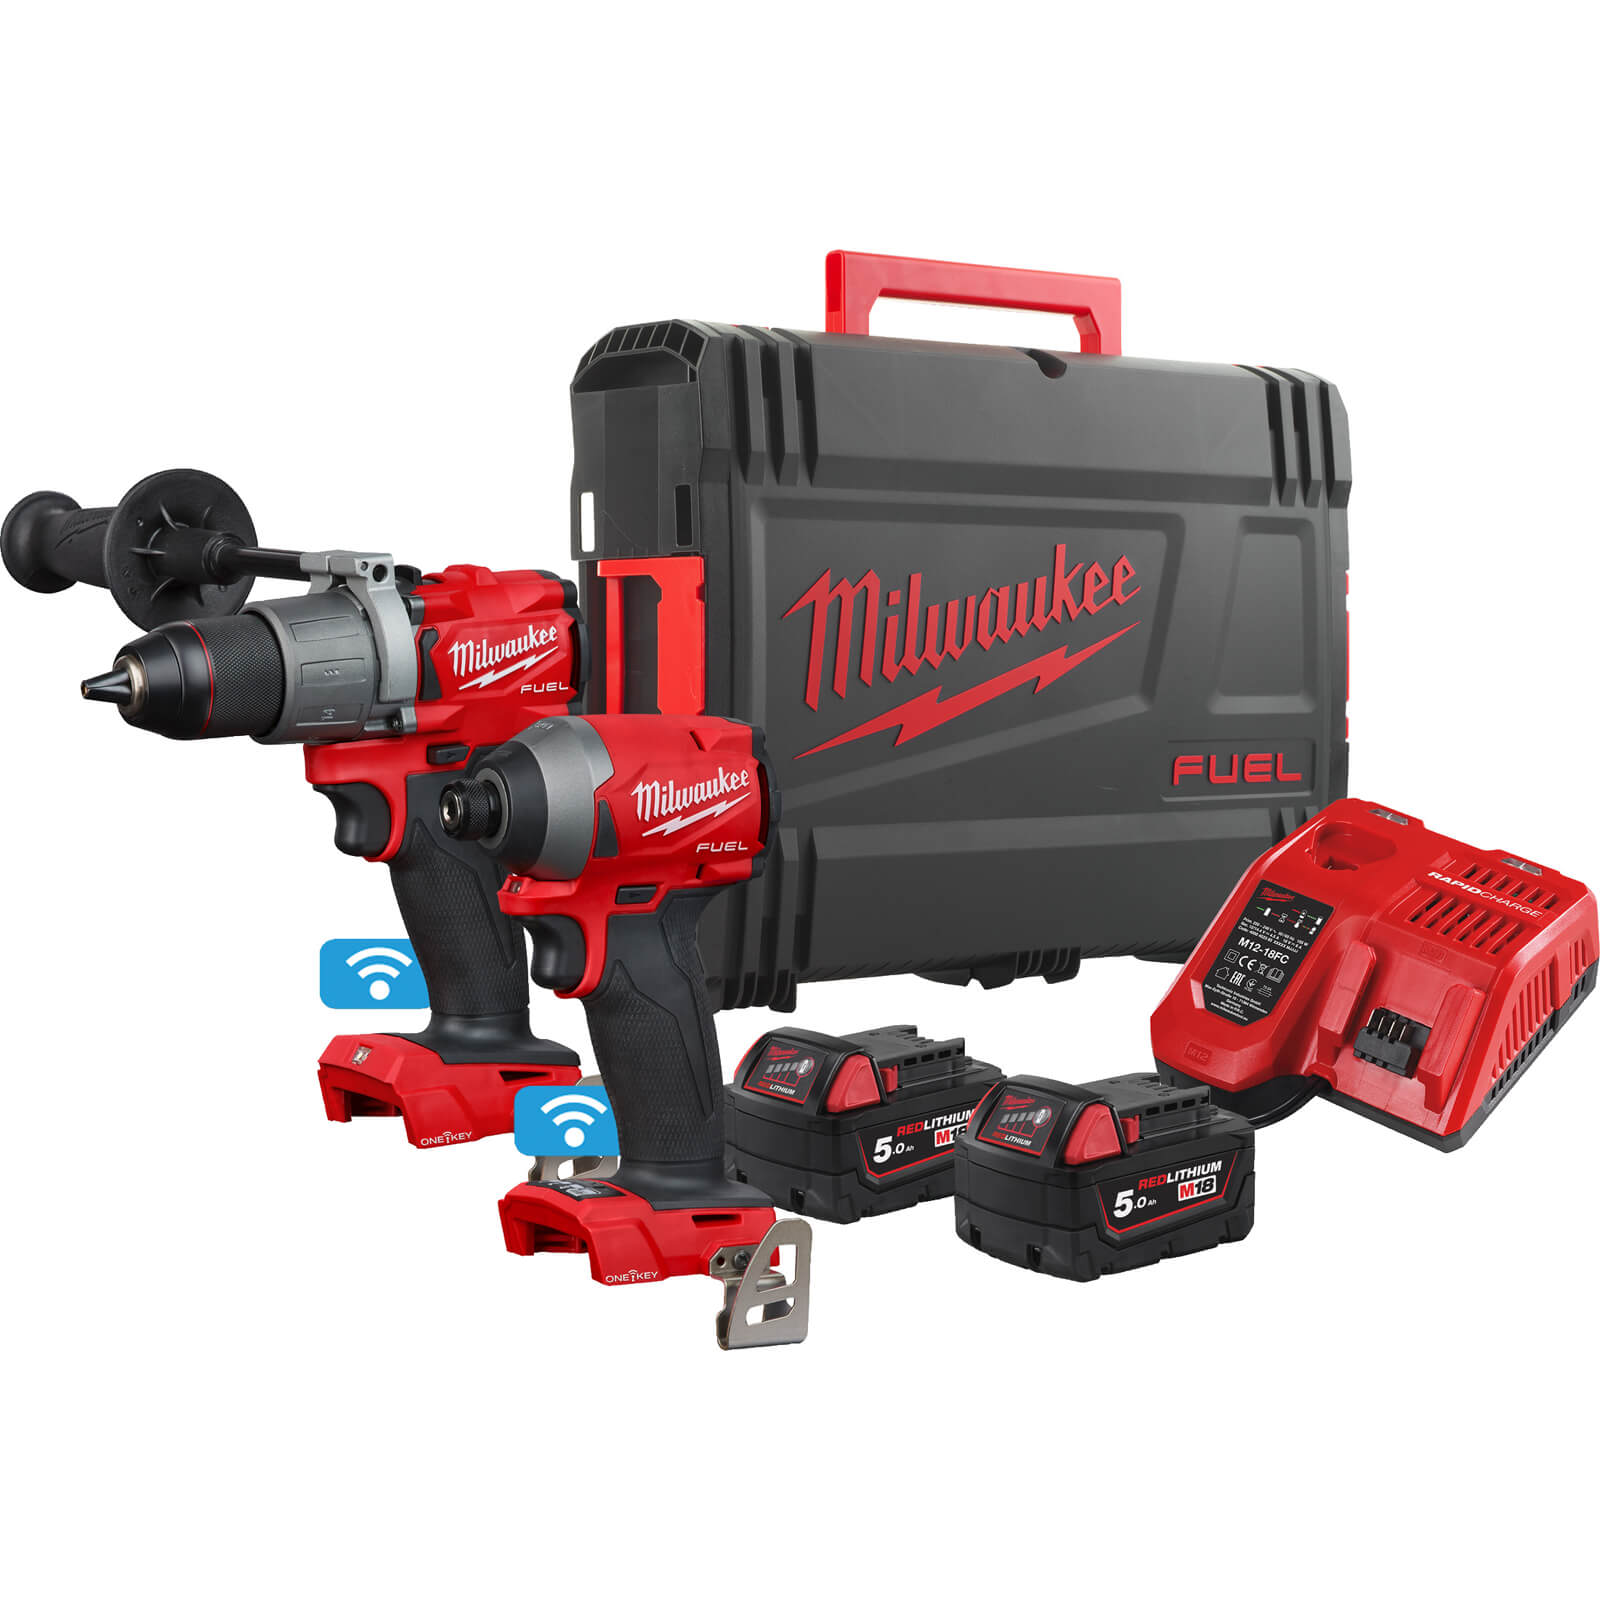 Image of Milwaukee M18 ONEPP2A2 Fuel 18v Cordless Brushless Combi Drill and Impact Driver Kit 2 x 5ah Li-ion Charger Case